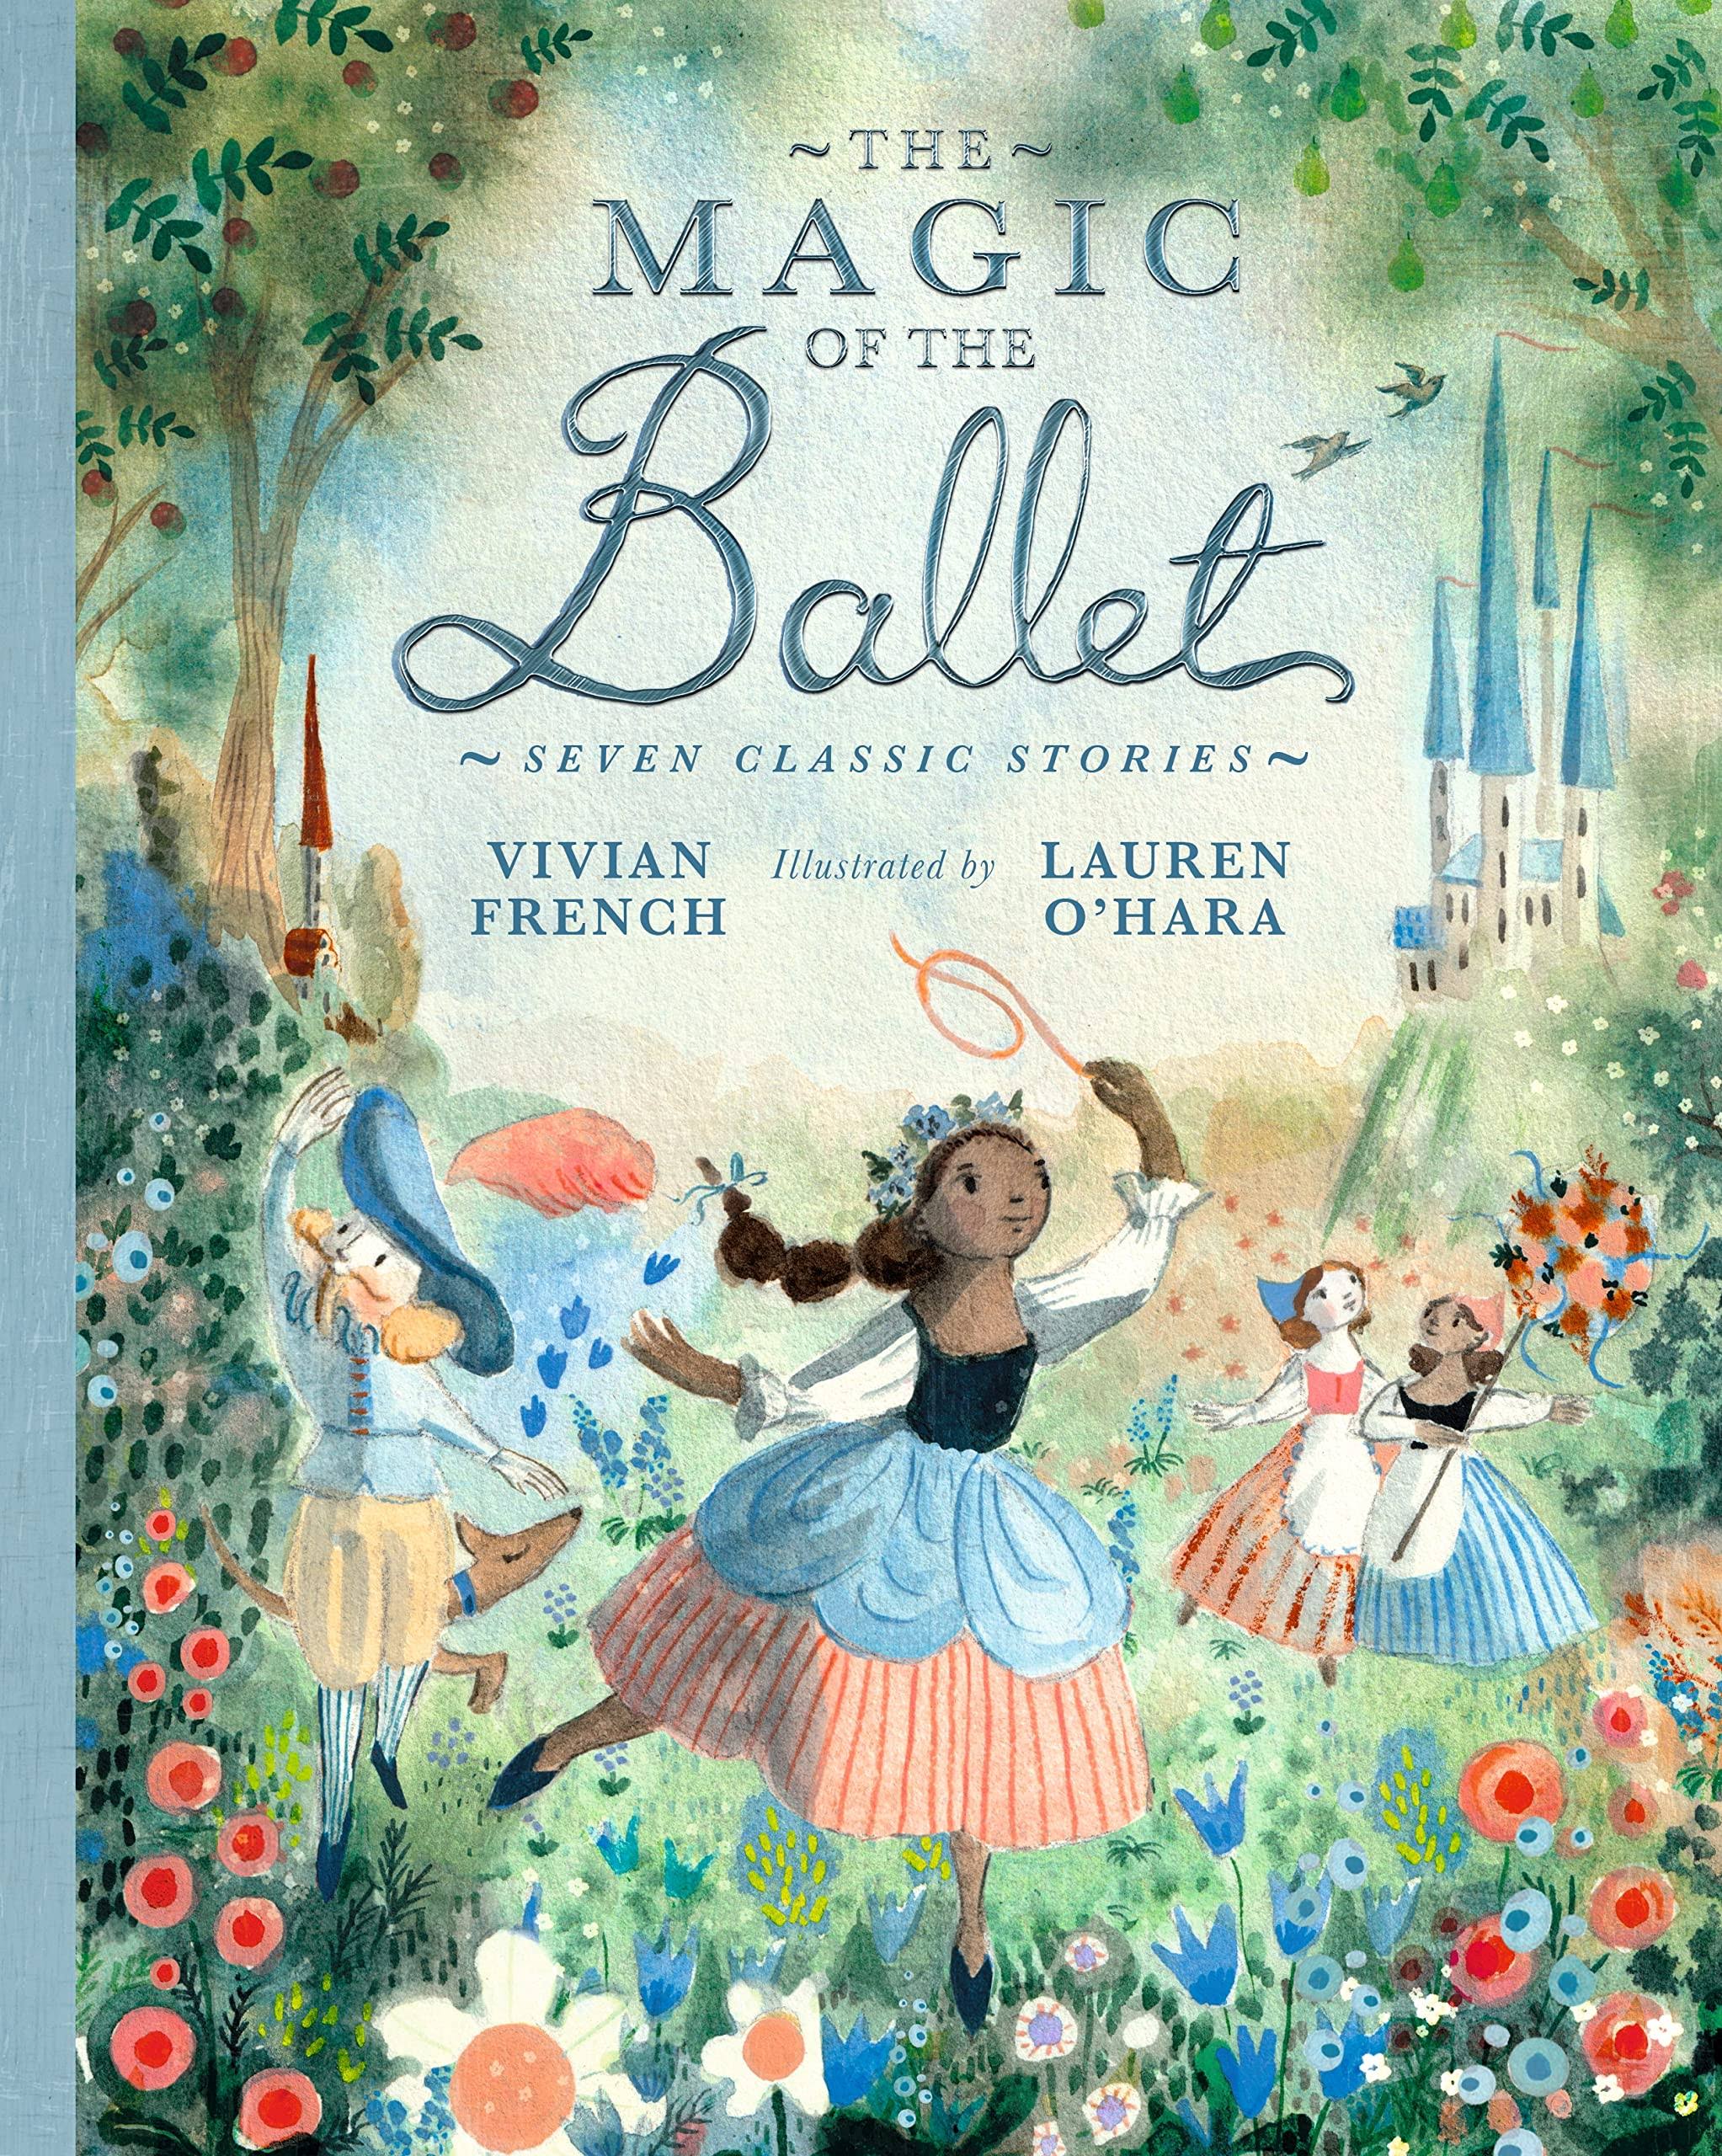 The Magic of the Ballet: Seven Classic Stories [Book]